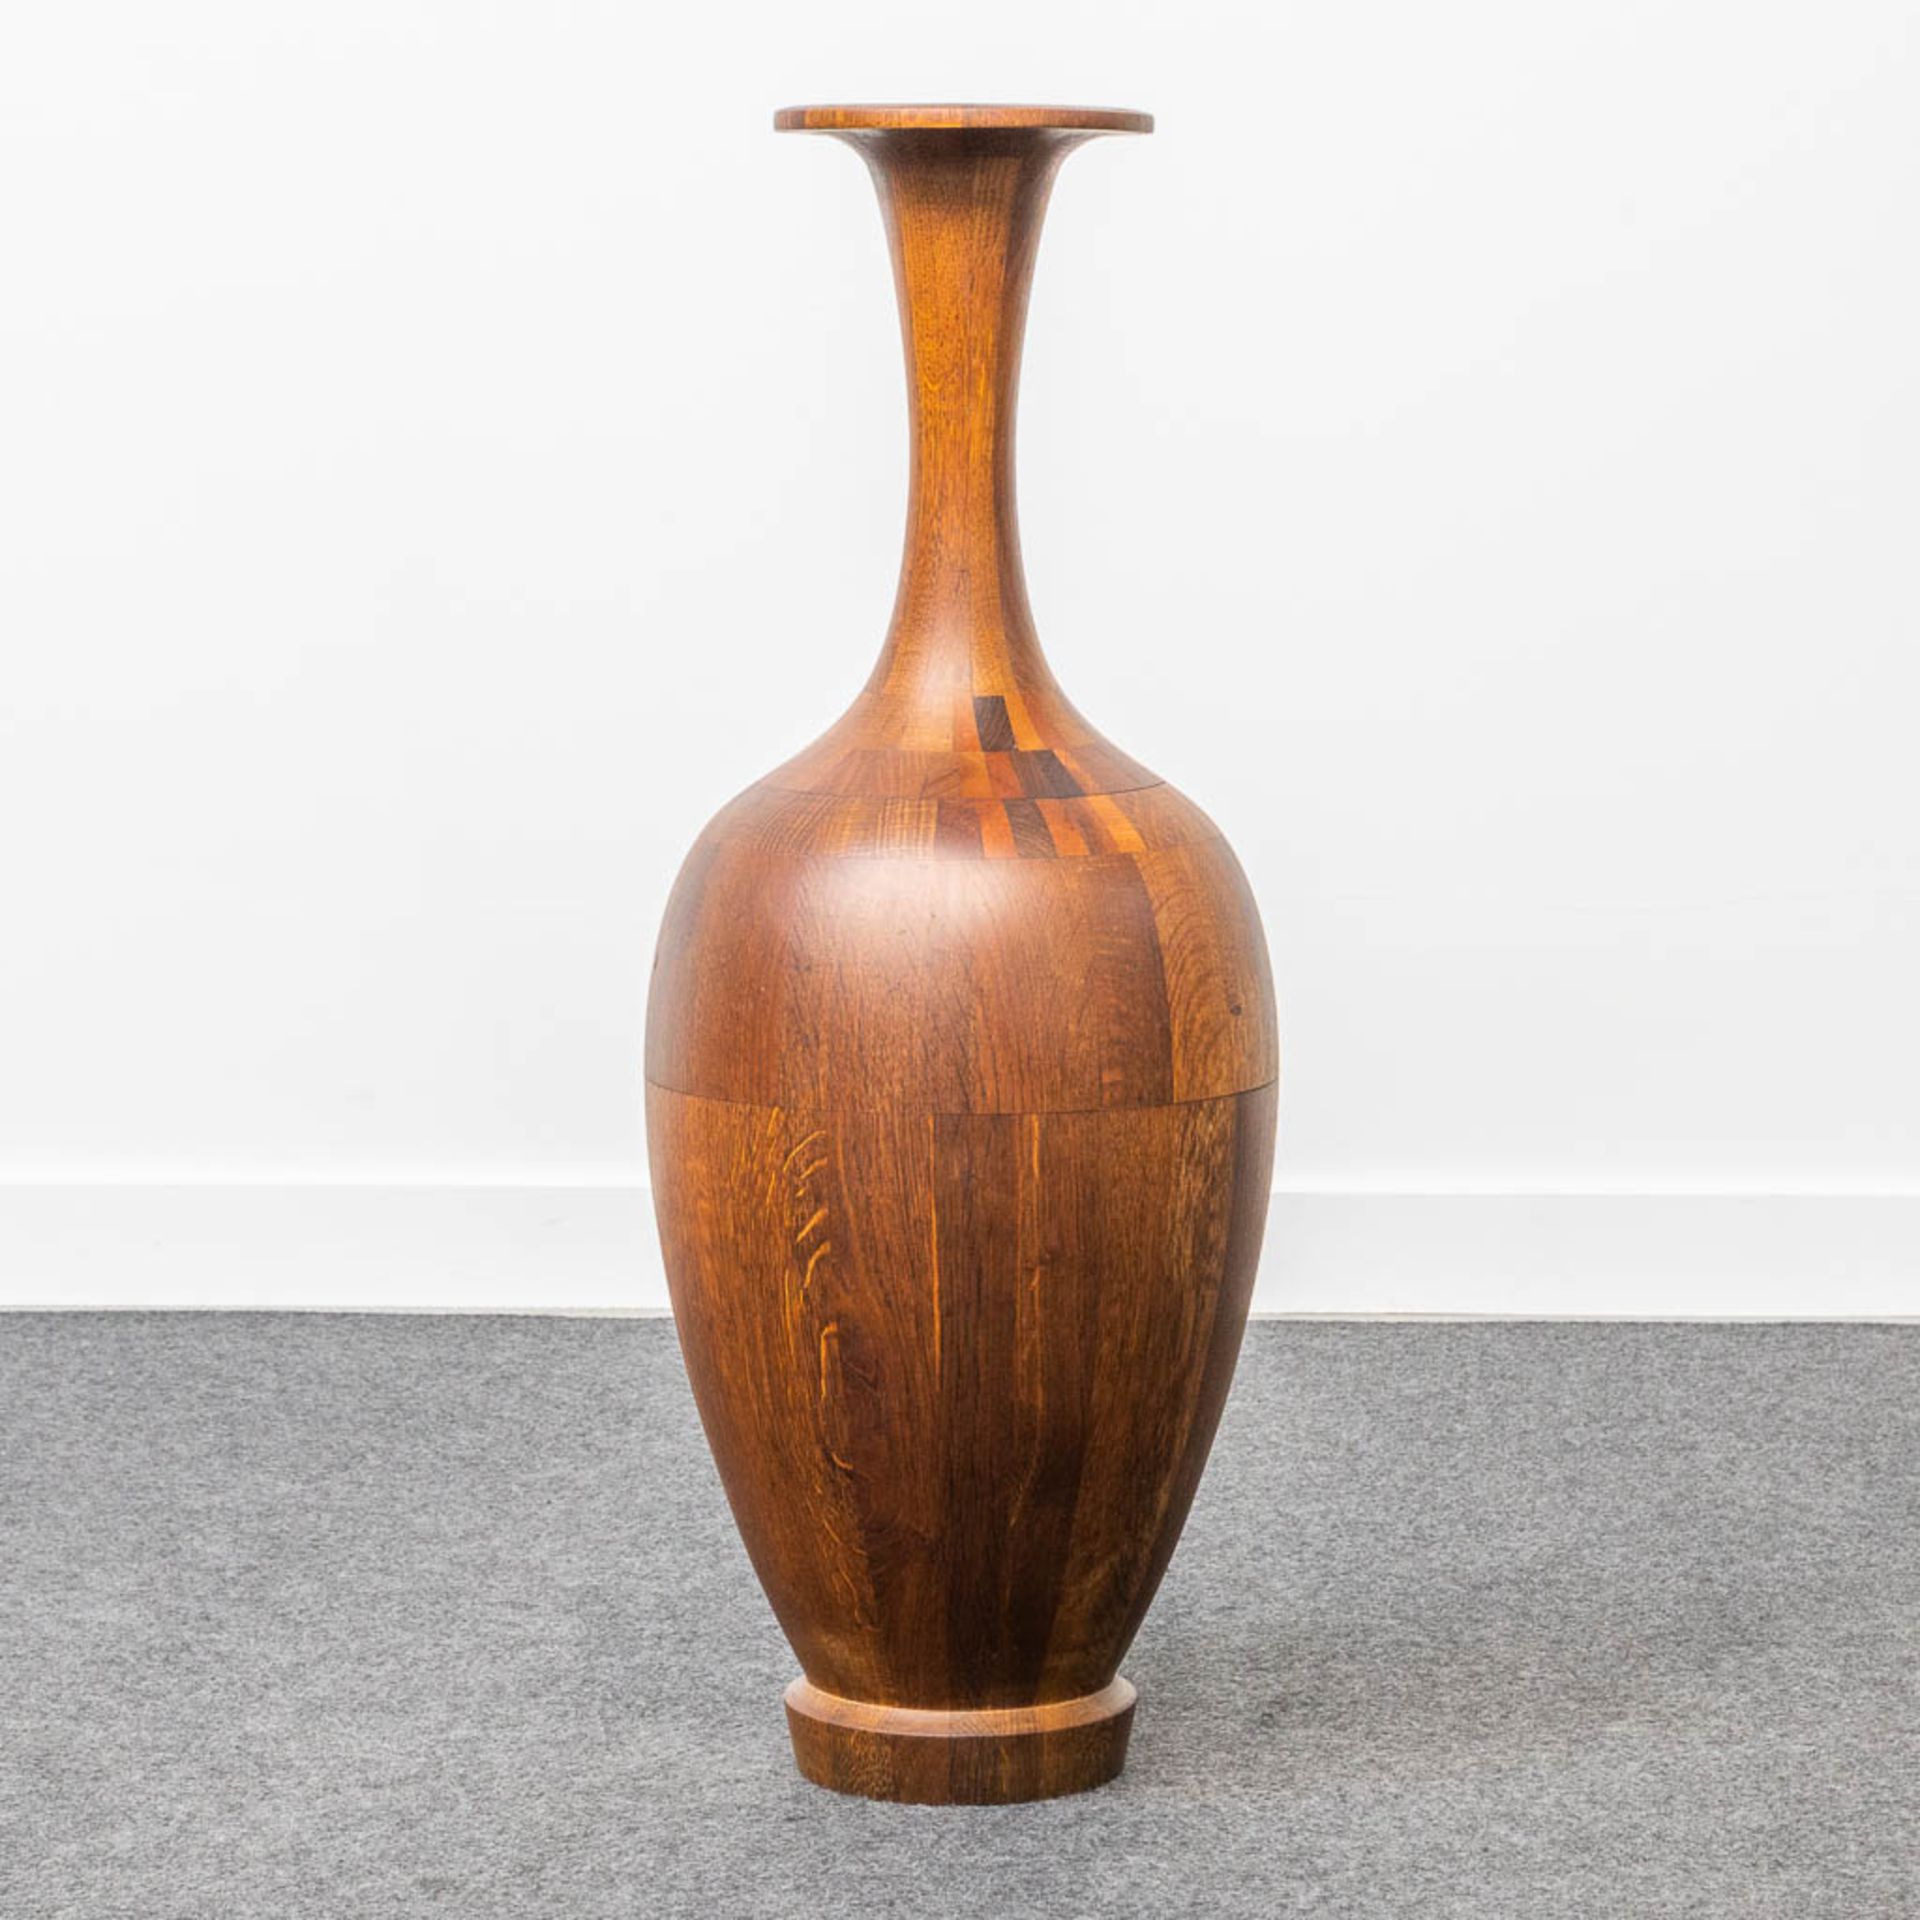 A collection of 4 wood-turned vases with inlay, made by DeCoene in Kortijk, Belgium. - Image 5 of 11